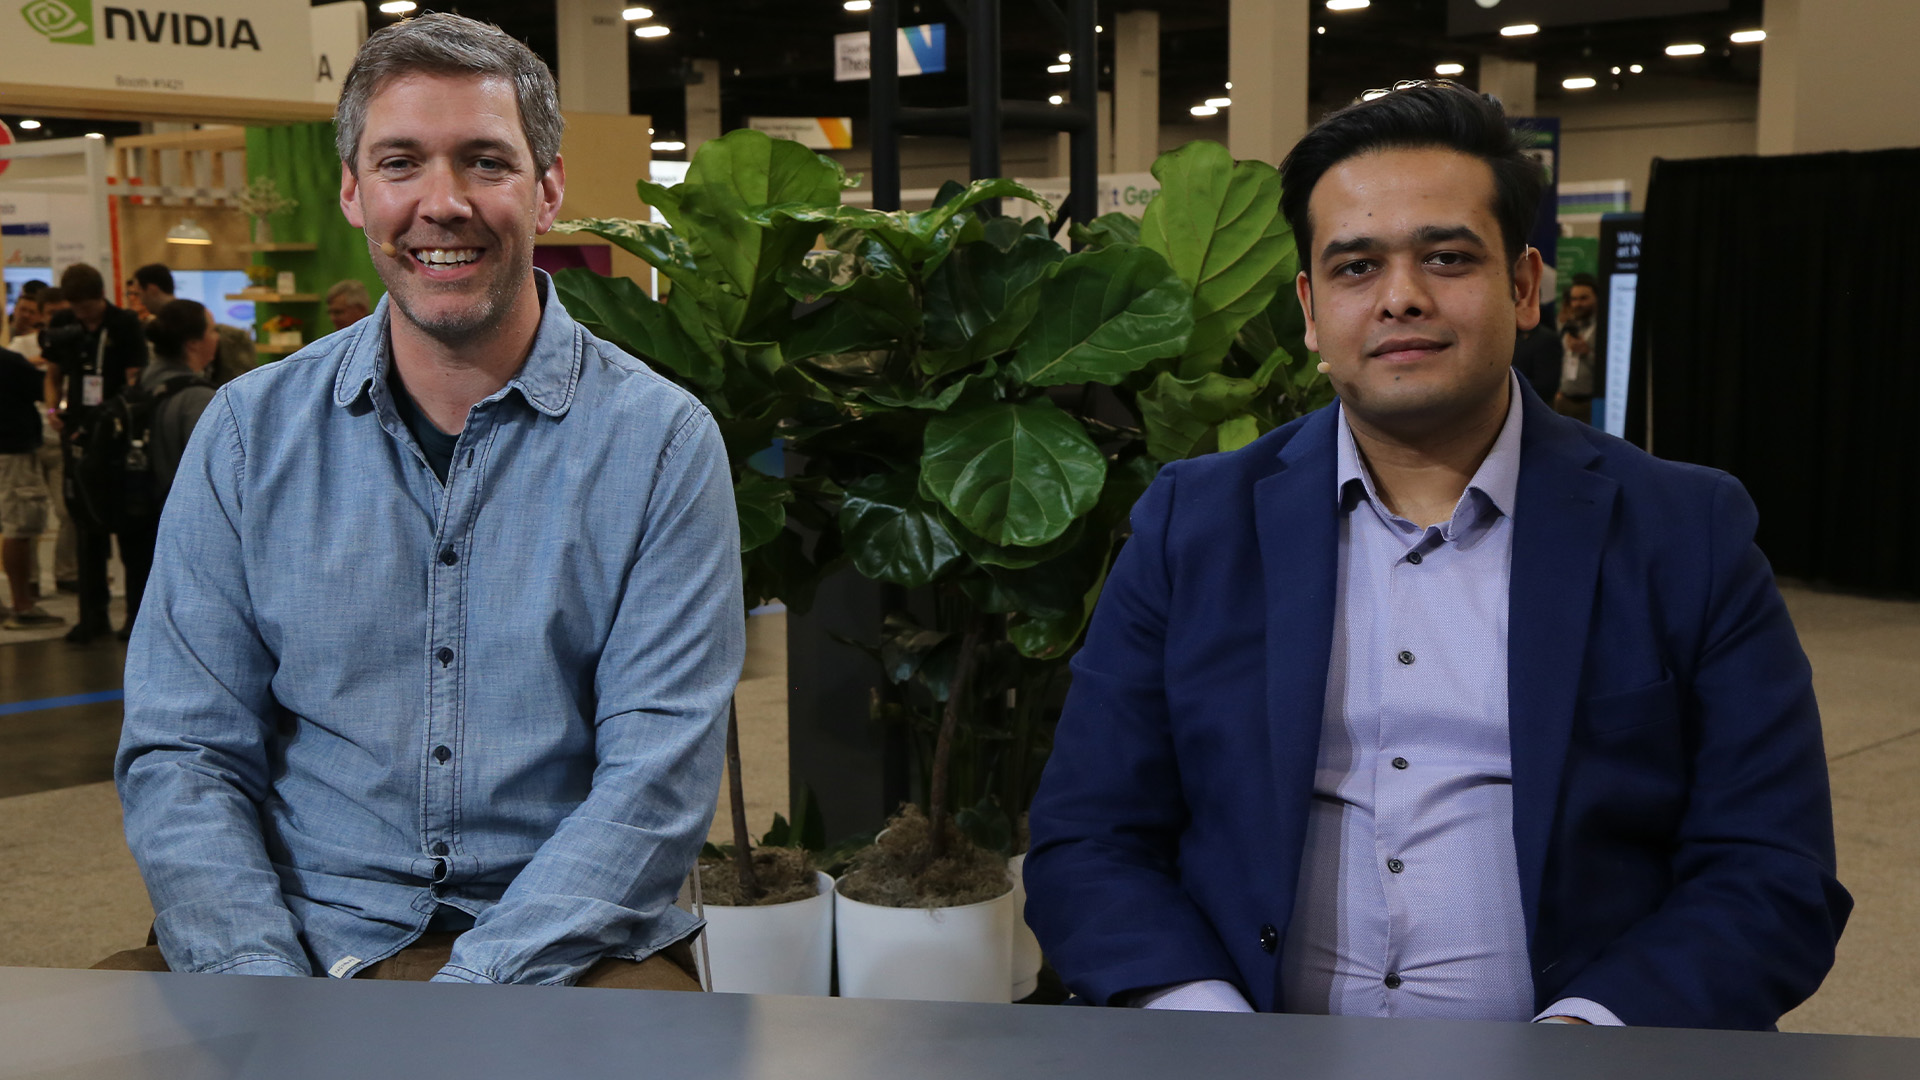 Ron Mills, vice president of API, data platforms and infrastructure, and cloud at Definity and Anand Nimkar, chief architect and generative AI practice leader at Deloitte Consulting LLP discussed the impact of AI in the contact center at Google Cloud Next.